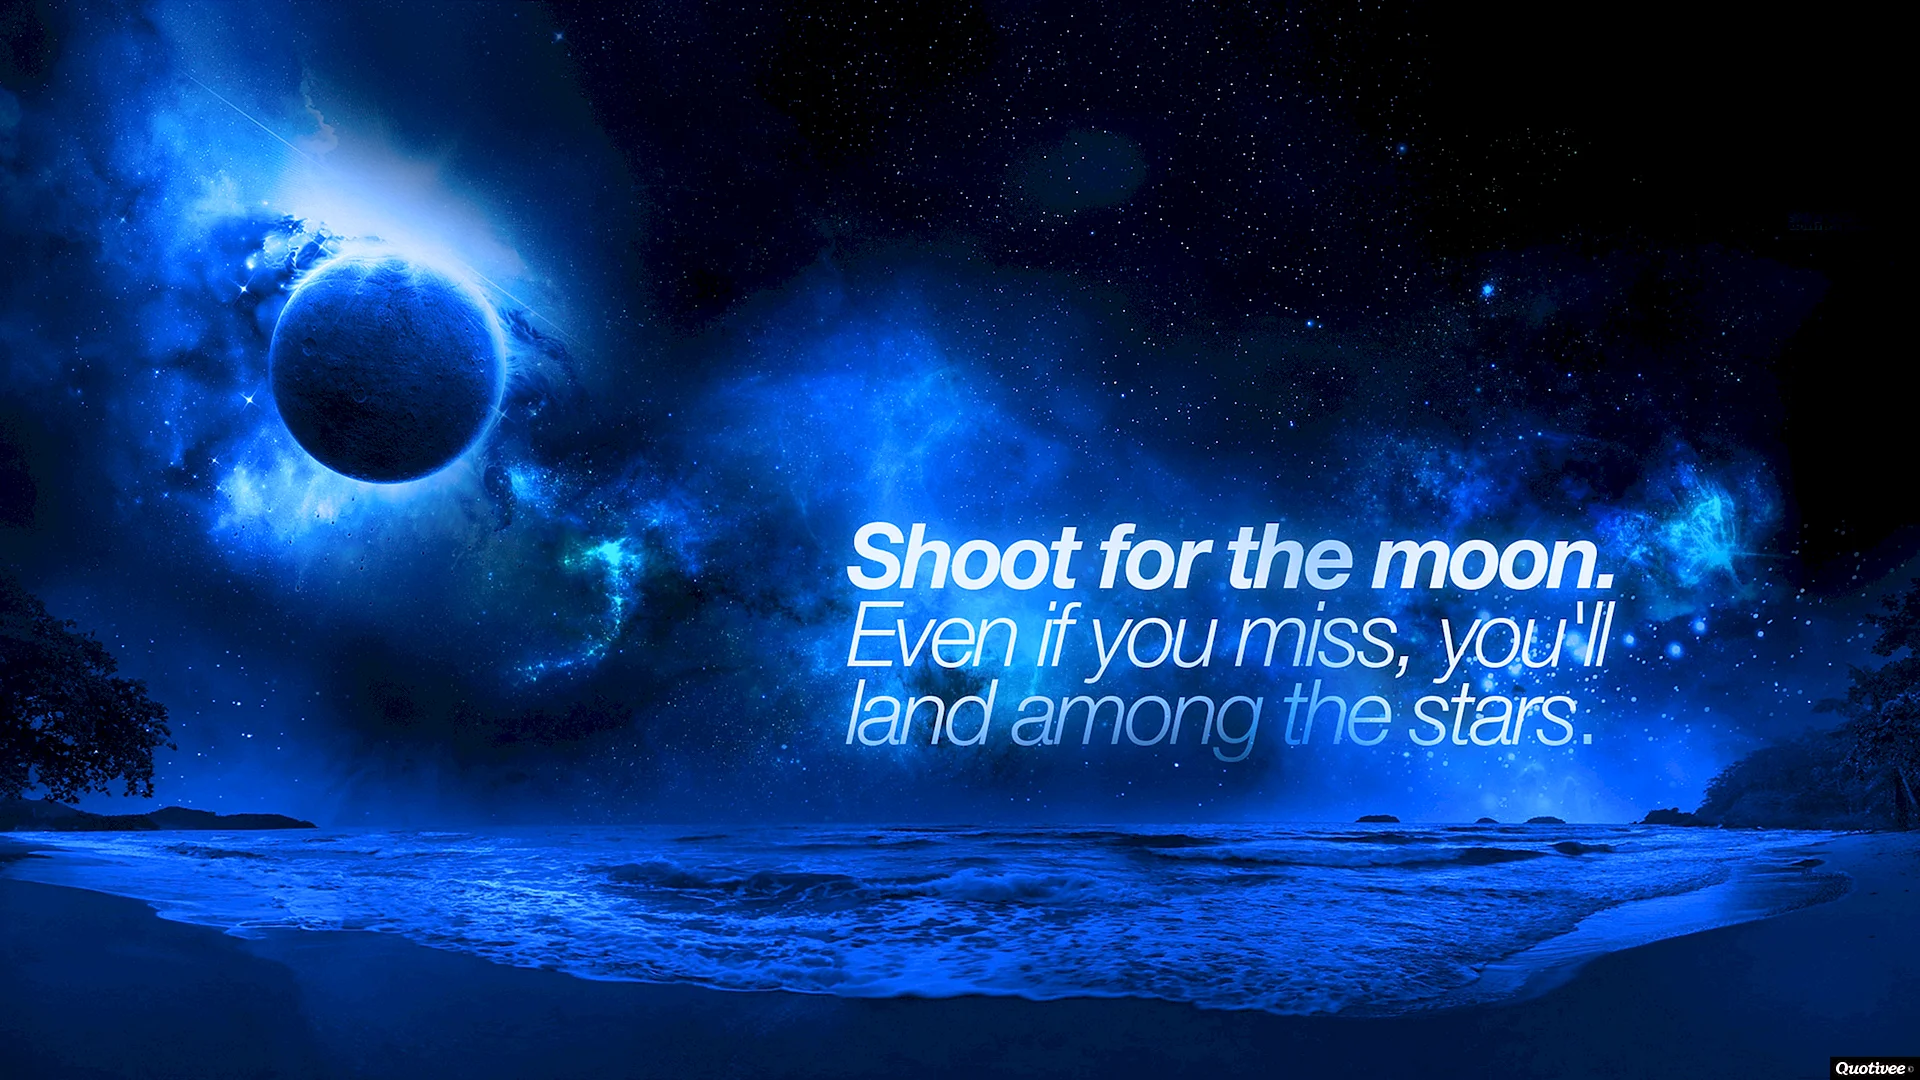 Shoot For The Moon. Even If You Miss Youll Land Among The Stars. Wallpaper